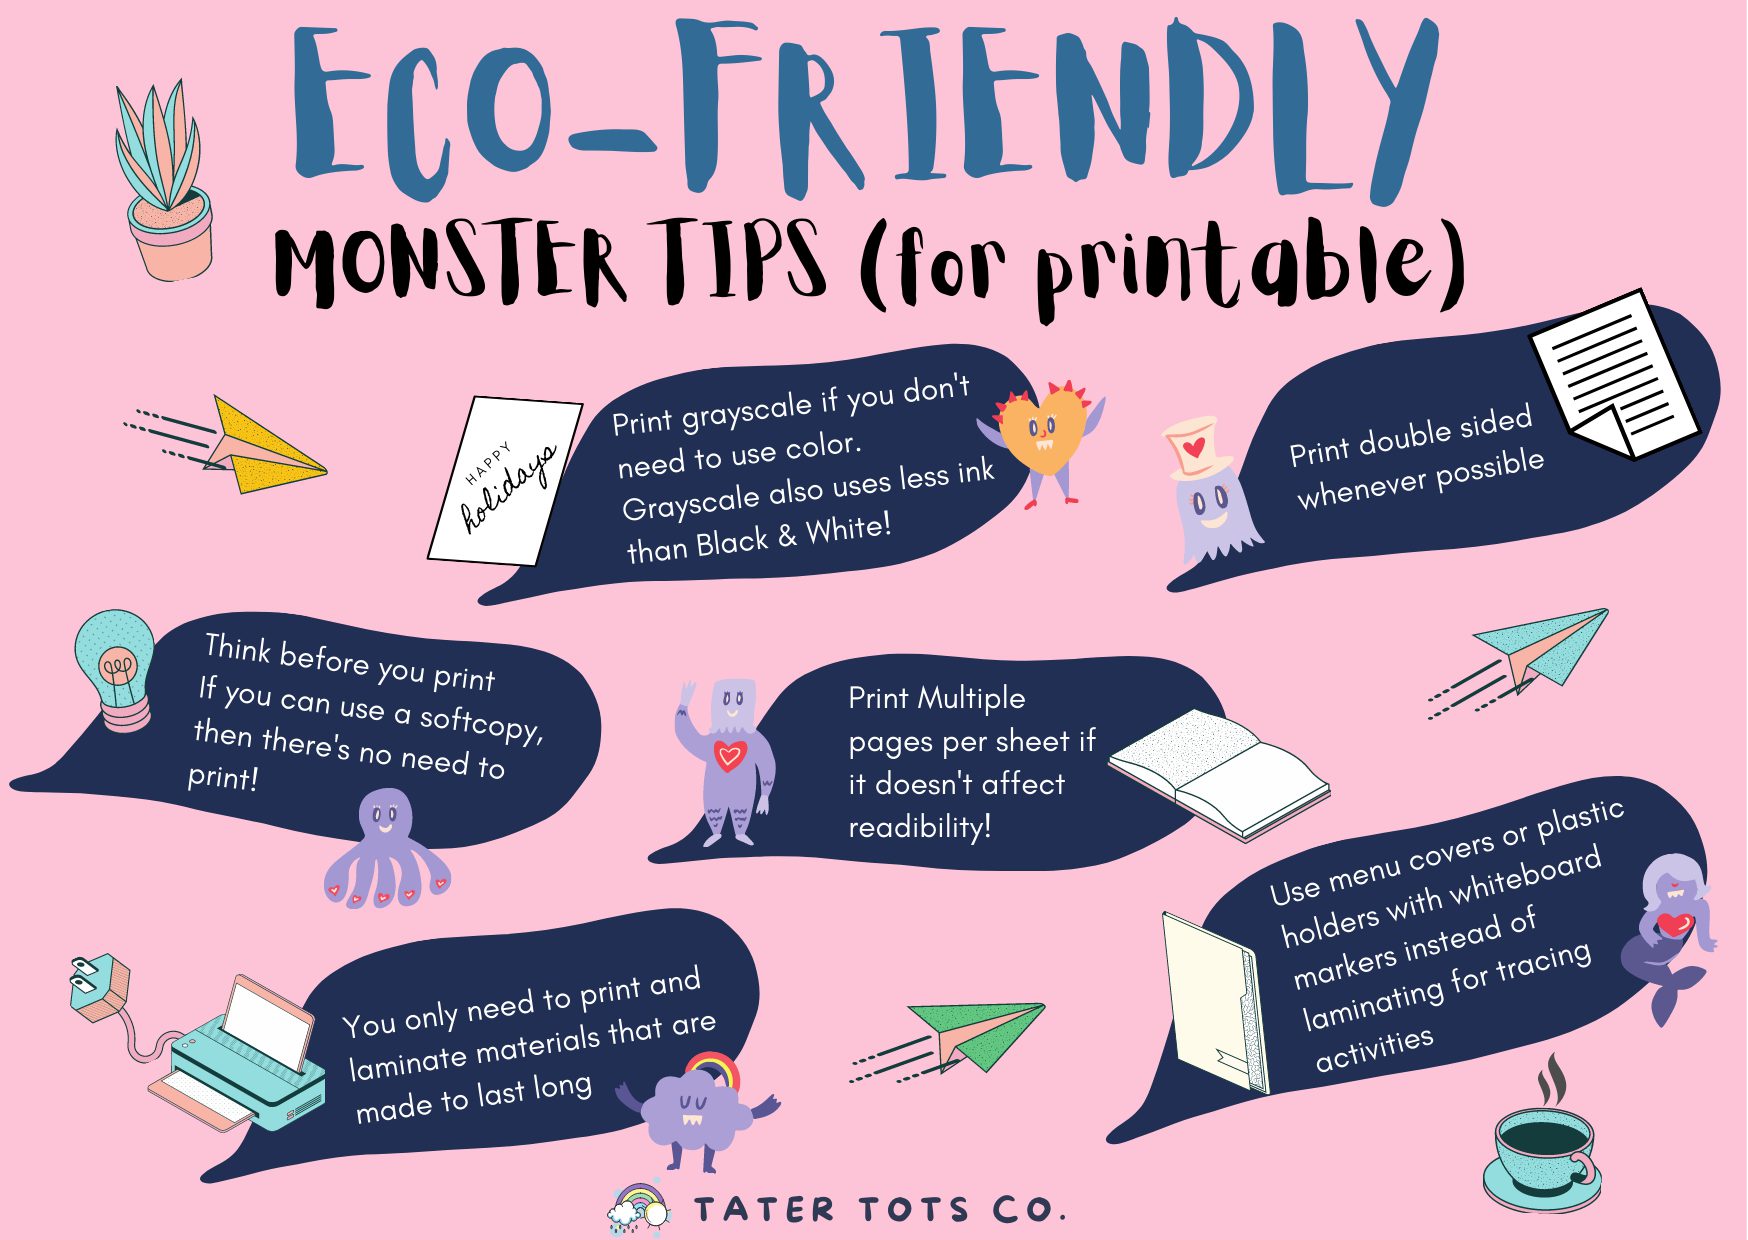 Before you hit the print button when printing learning materials, read the Eco Friendly Saving monster tips! Conserve printer ink, save money and paper while you enjoy using online resources.  #environmentallyfriendly #freeprintable